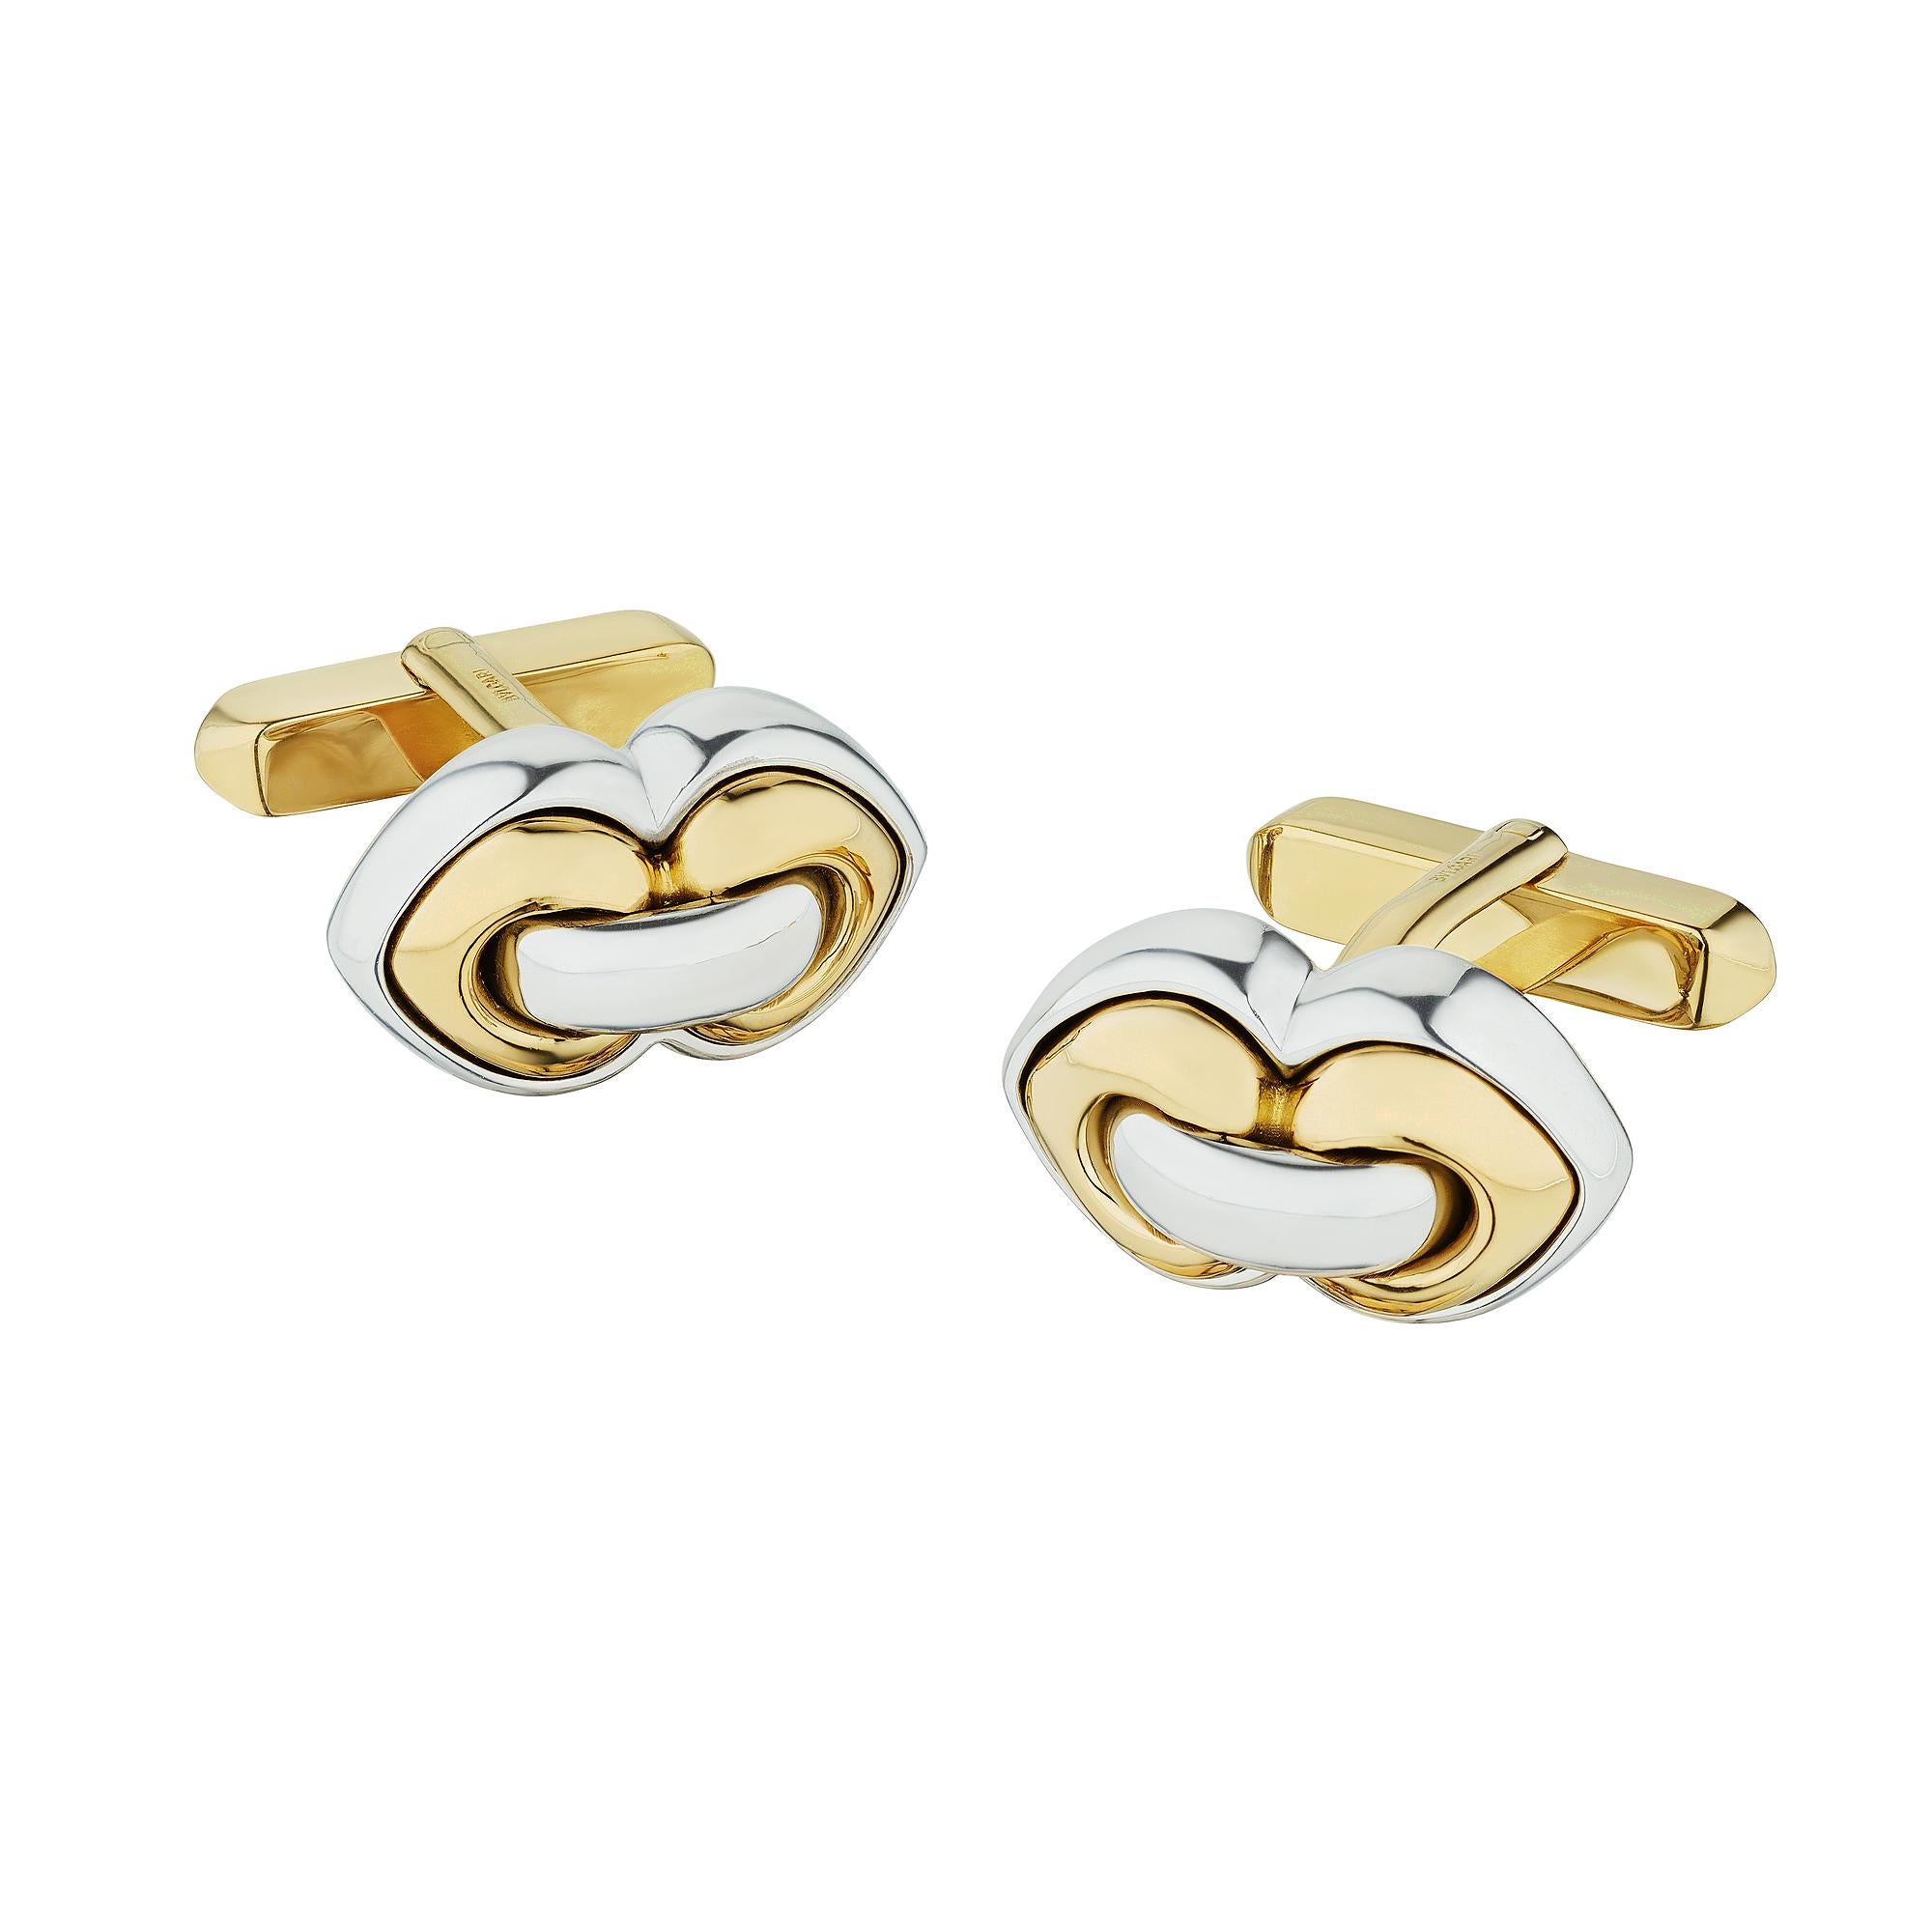 Whether worn by a woman or a man, these chic Bulgari Modernist bi-colored gold cufflinks are irresistible.  Easily coordinated with other gold, platinum, or silver accessories, these rare and collectible cufflinks work 24/7.  Signed Bulgari.  Circa